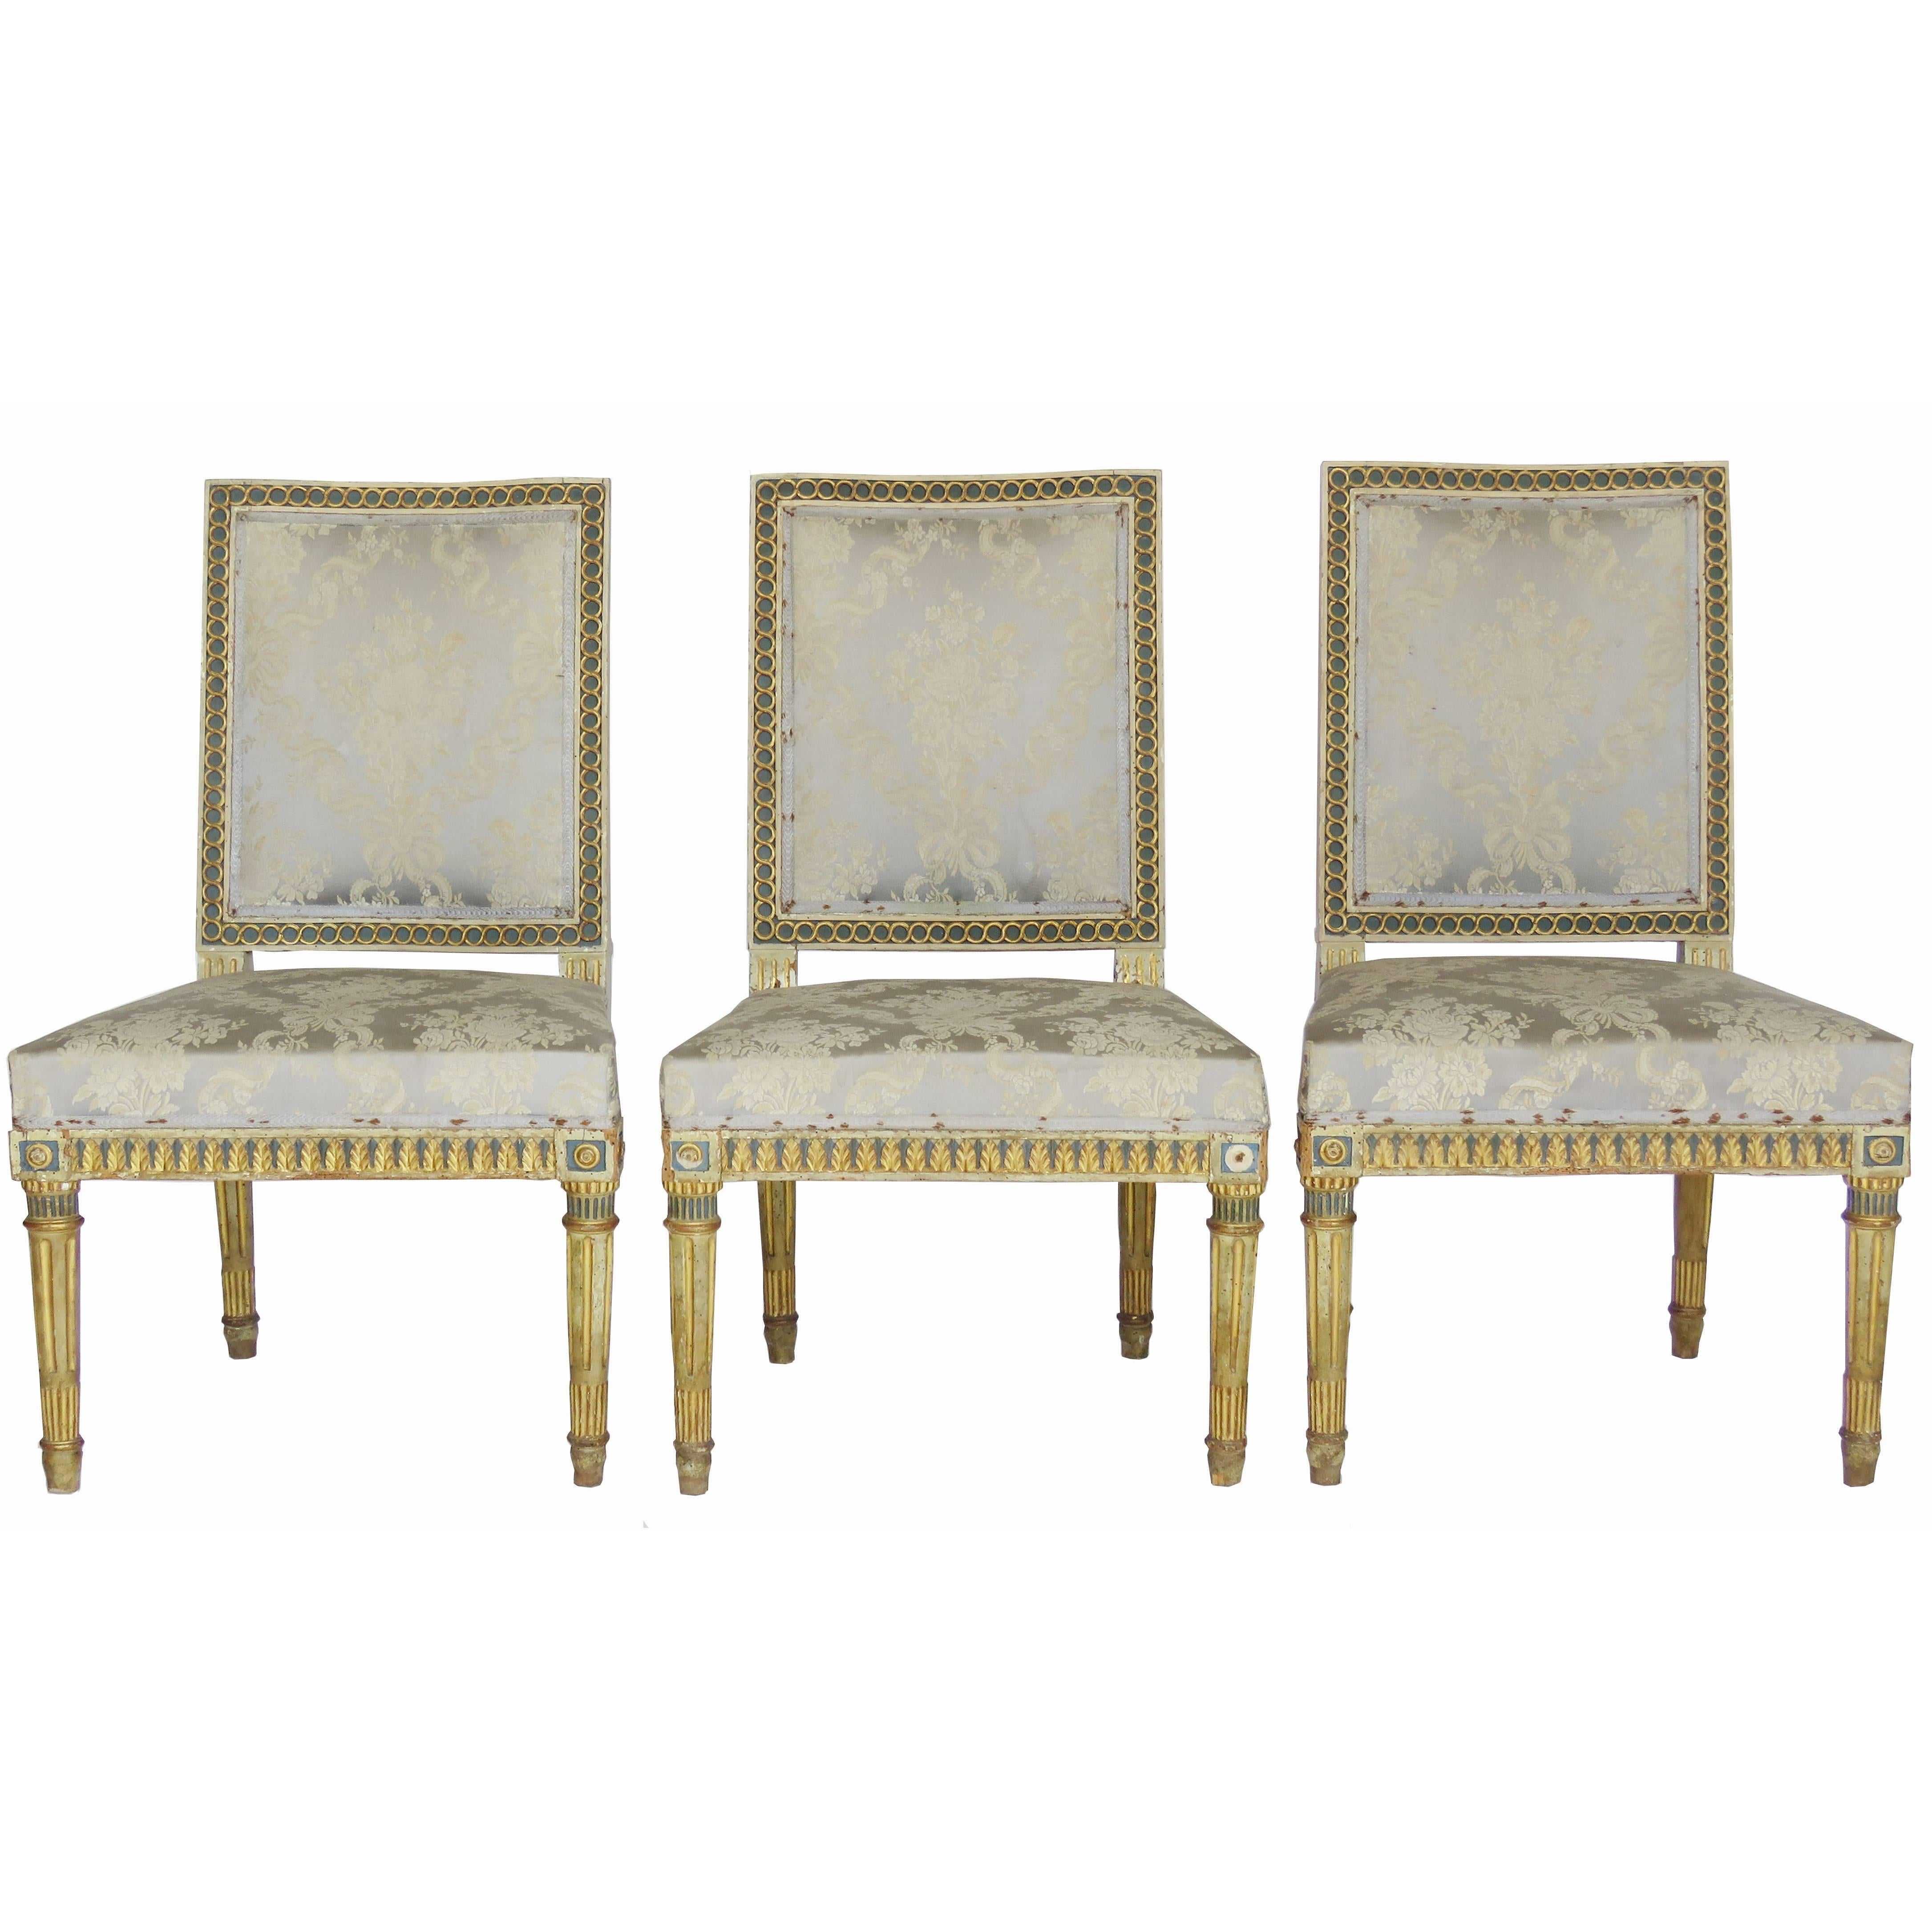 Set of Three Giltwood Louis XVI Style Chairs For Sale